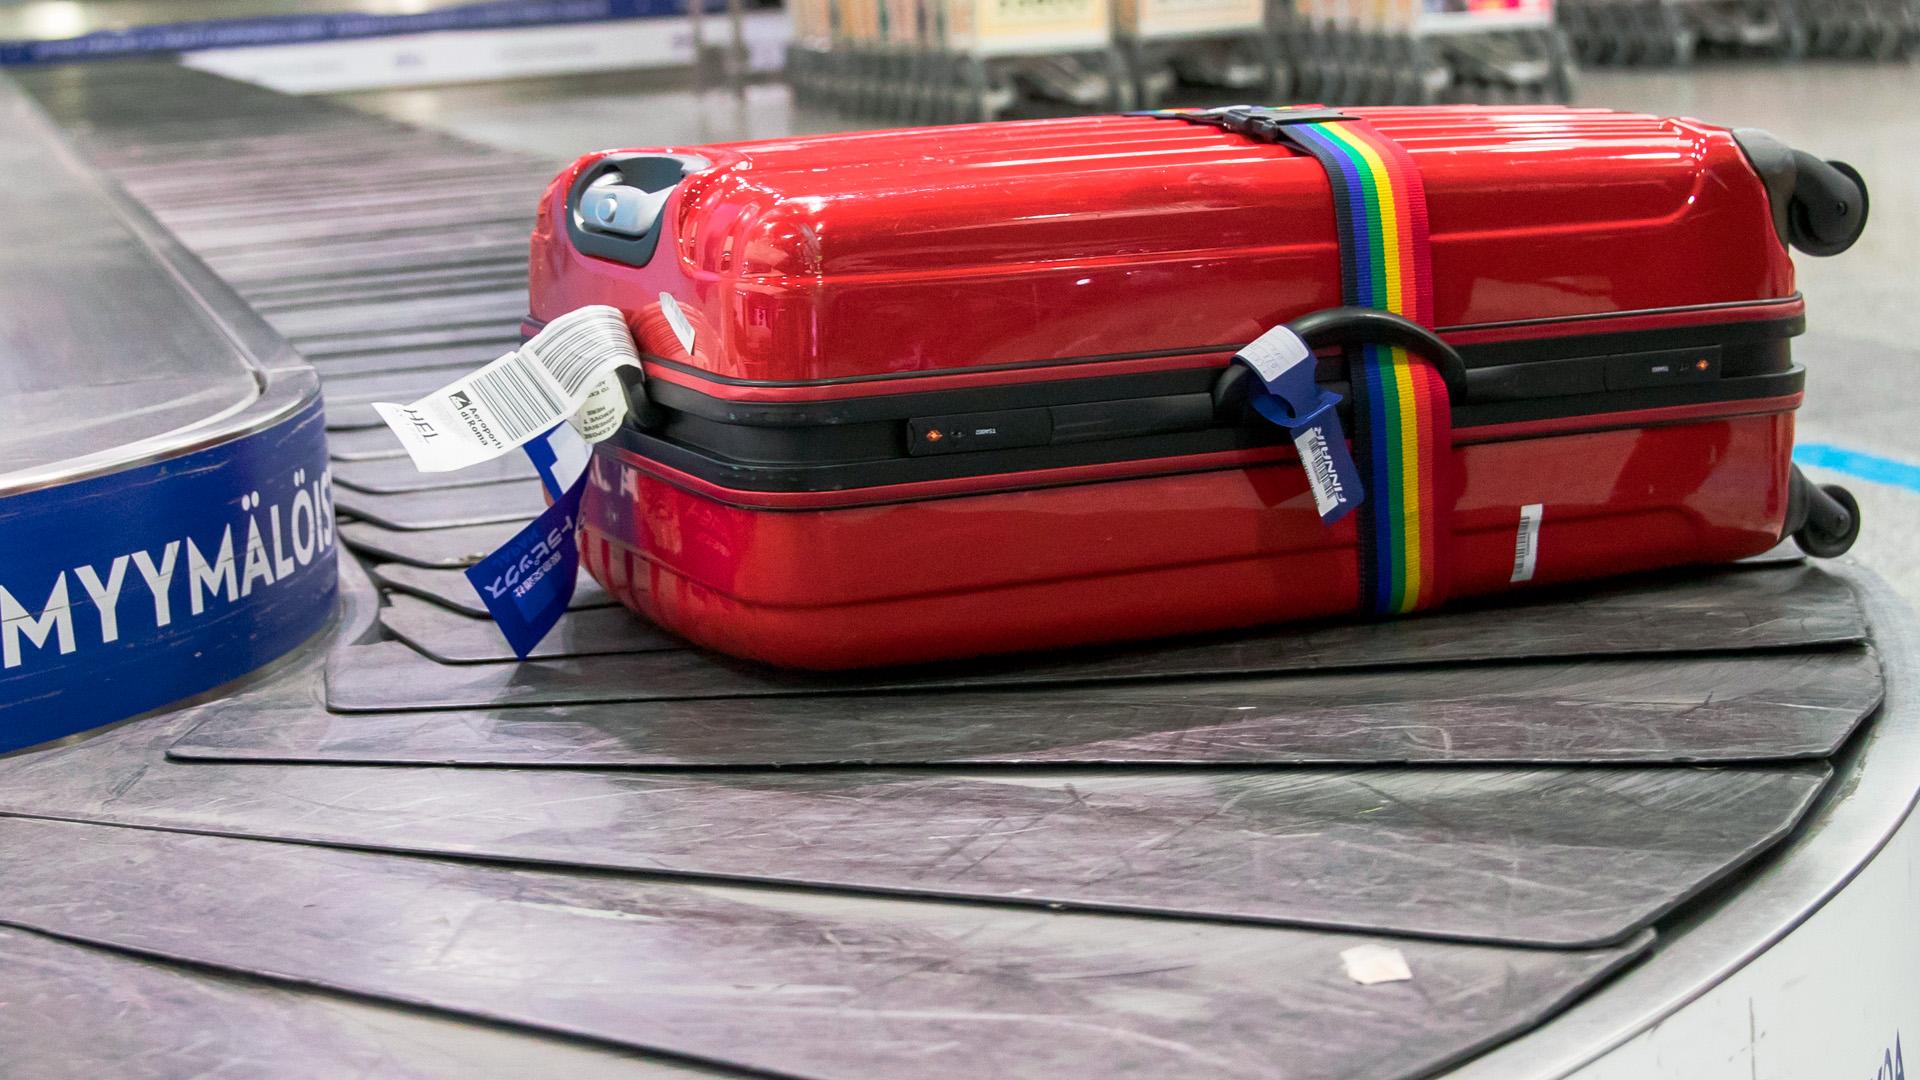 A suitcase on a baggage carousel at an airport.